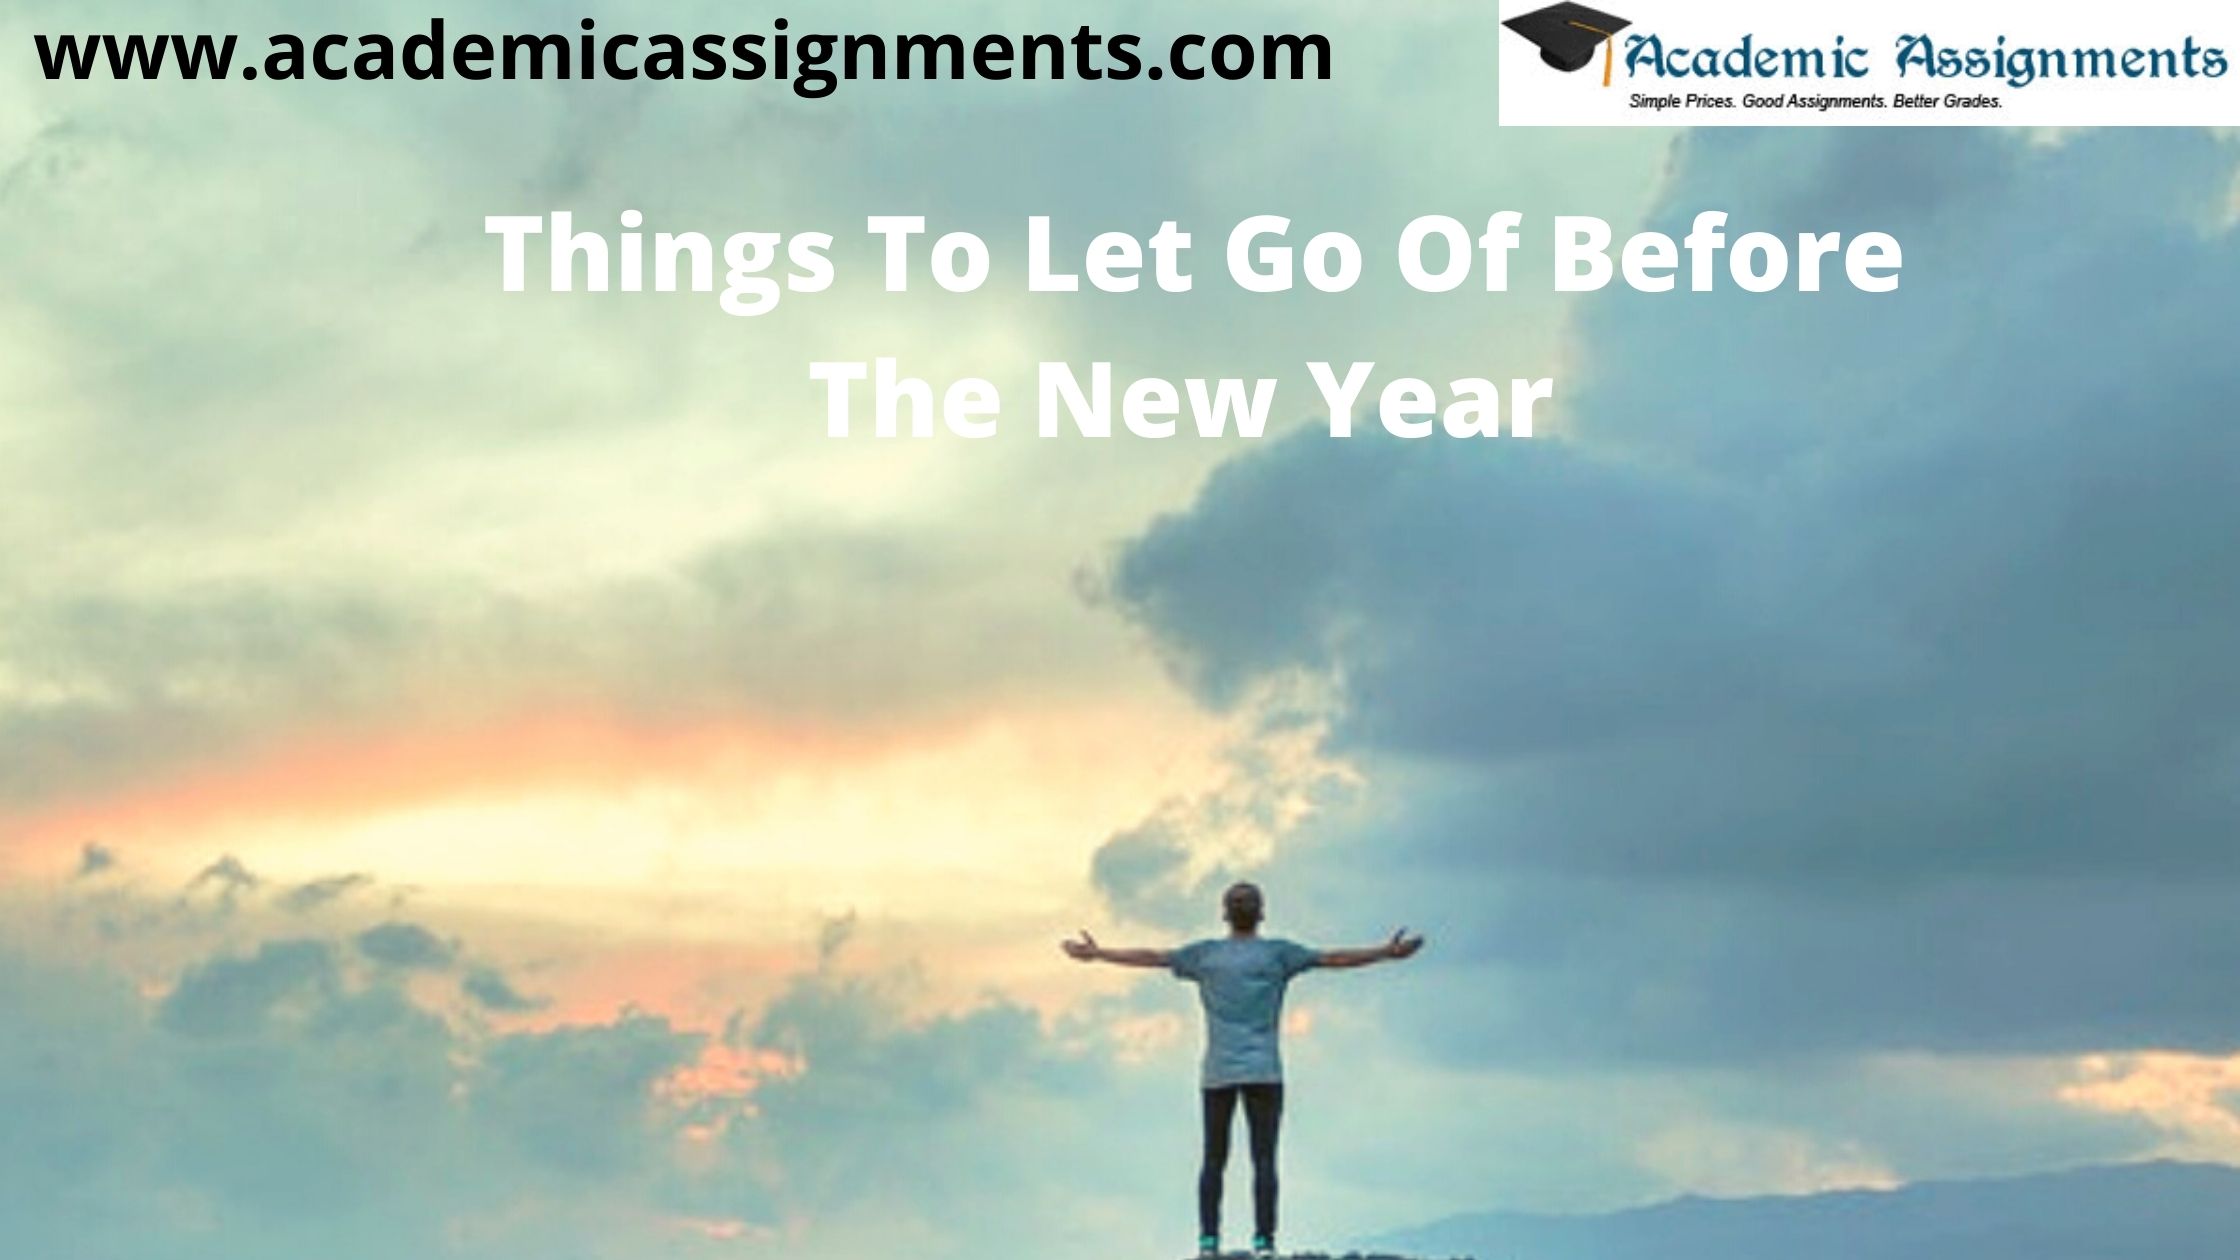 Things To Let Go Of Before The New Year